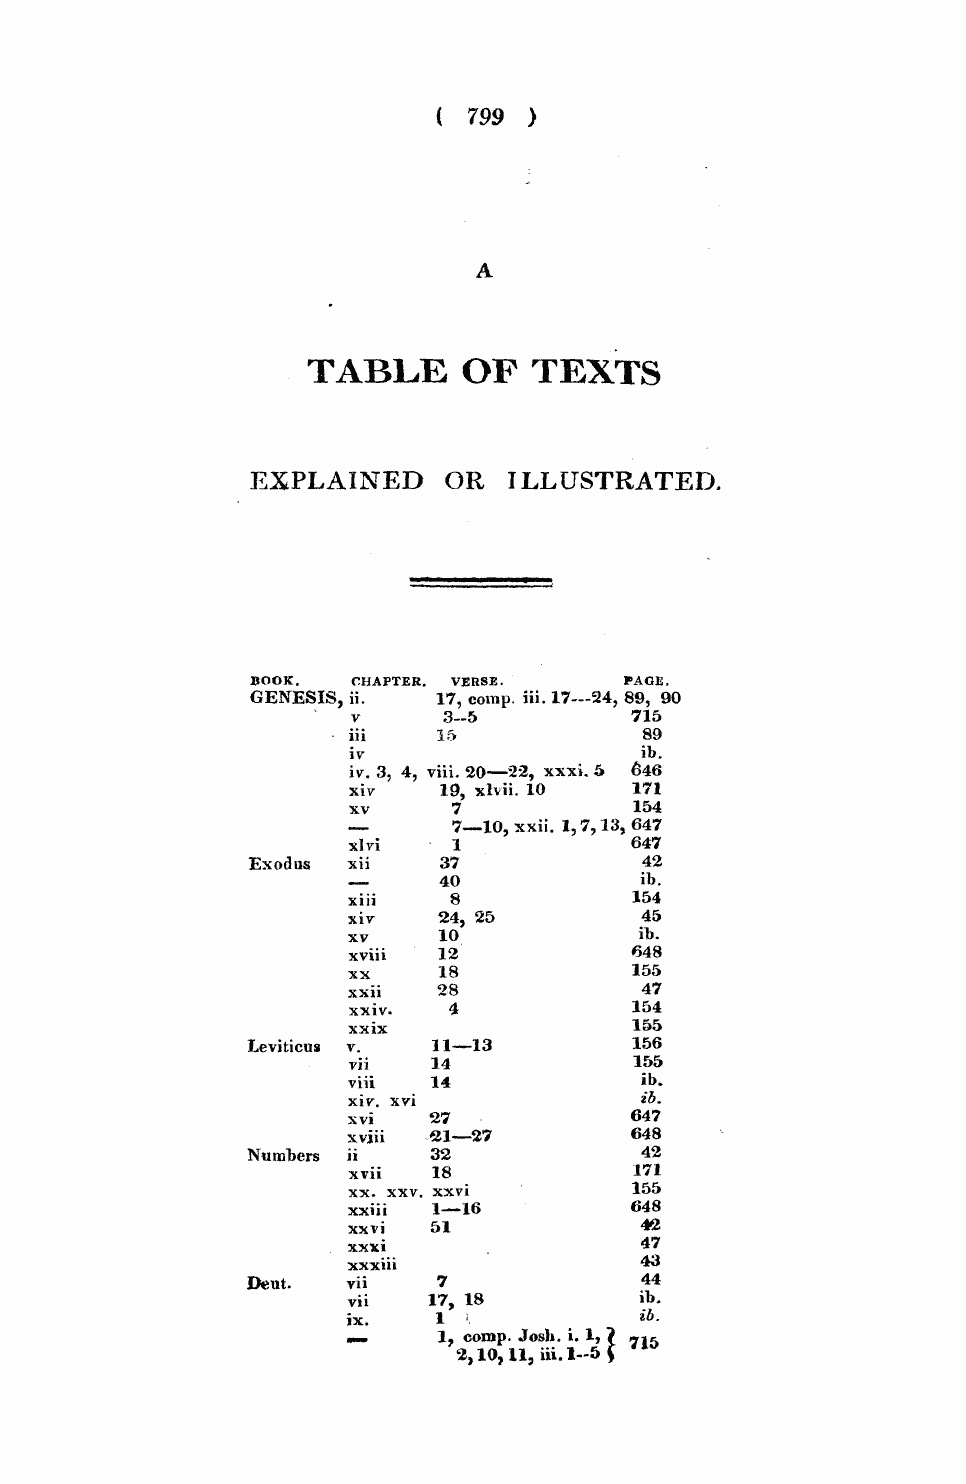 Monthly Repository (1806-1838) and Unitarian Chronicle (1832-1833): F Y, 1st edition, End matter - A Table Of Texts Explained Or Illustrated.